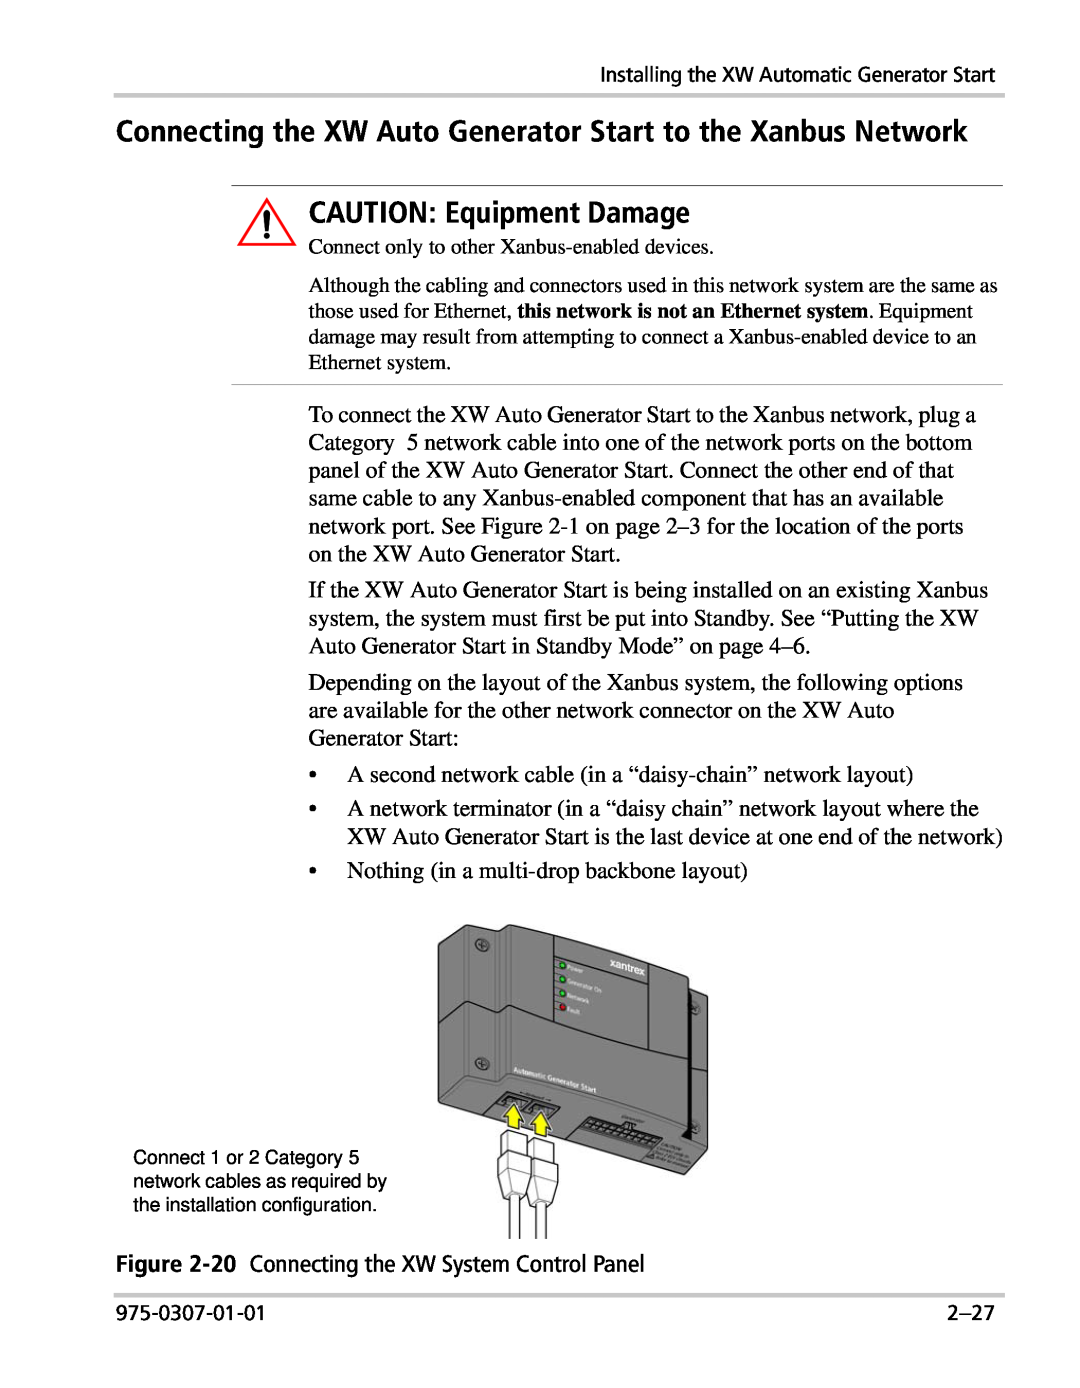 Xantrex Technology manual Connecting the XW Auto Generator Start to the Xanbus Network, CAUTION Equipment Damage 